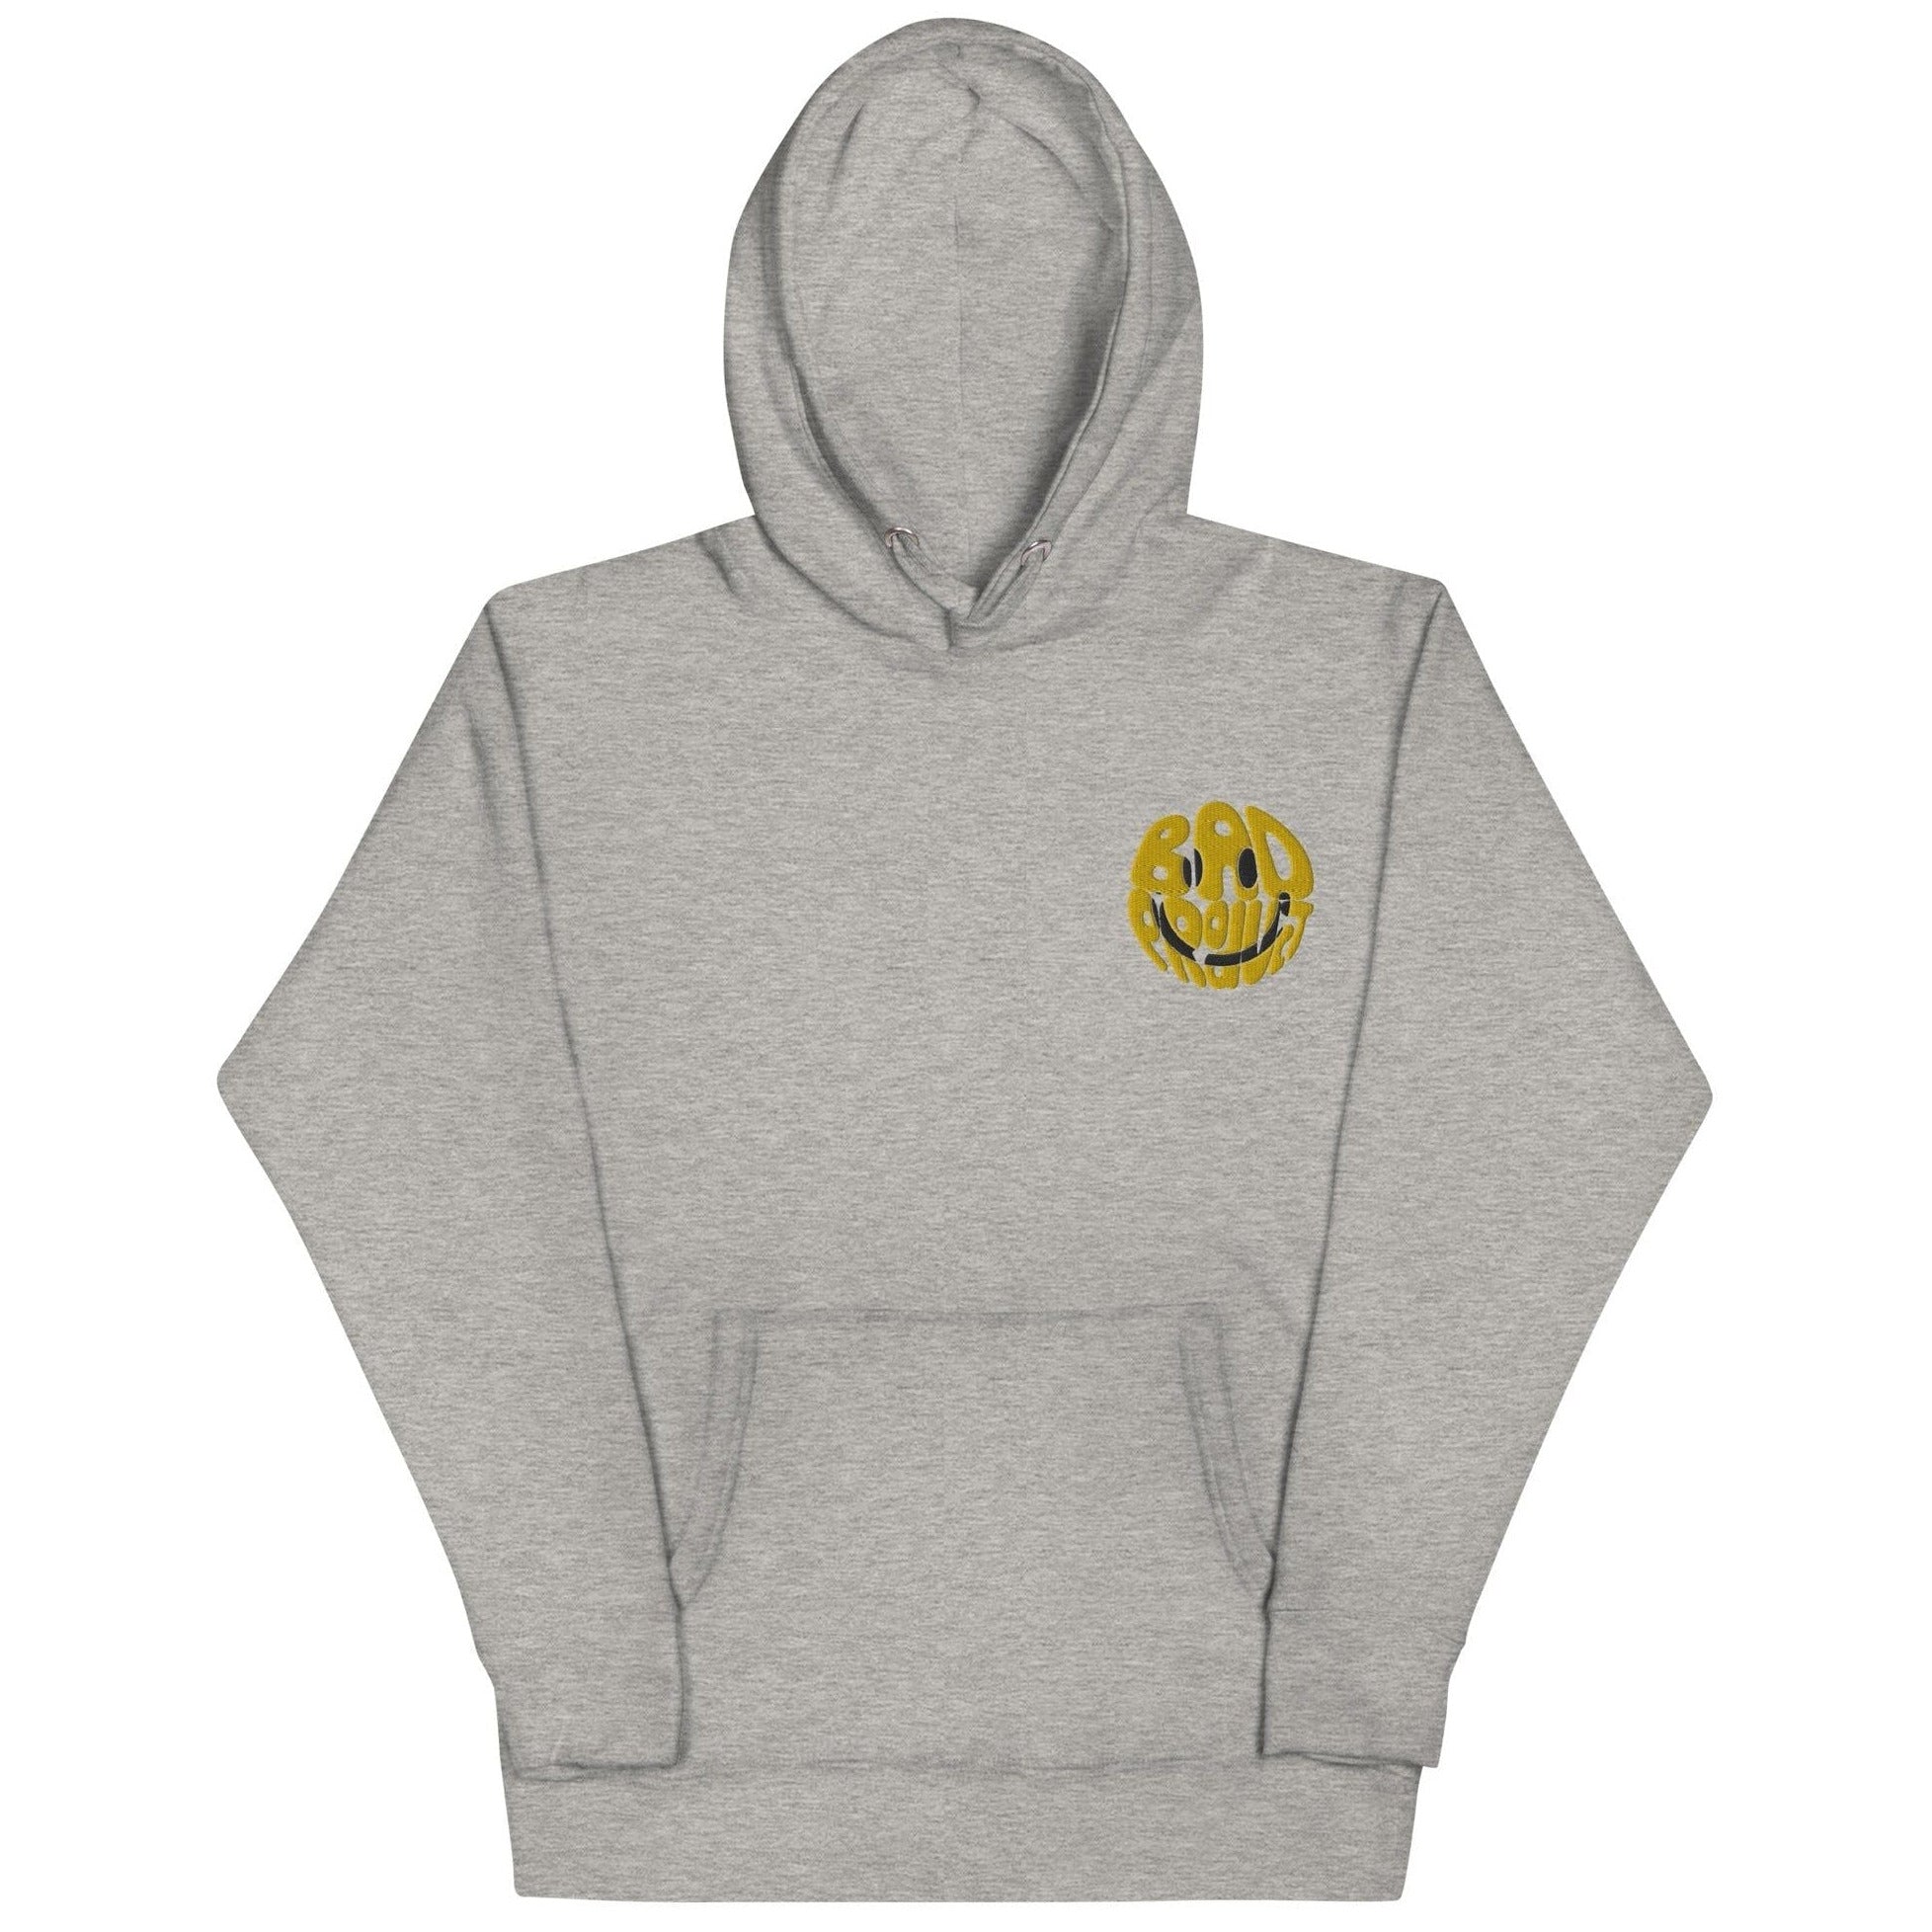 Gray hoodie featuring an embroidered gold smiley logo